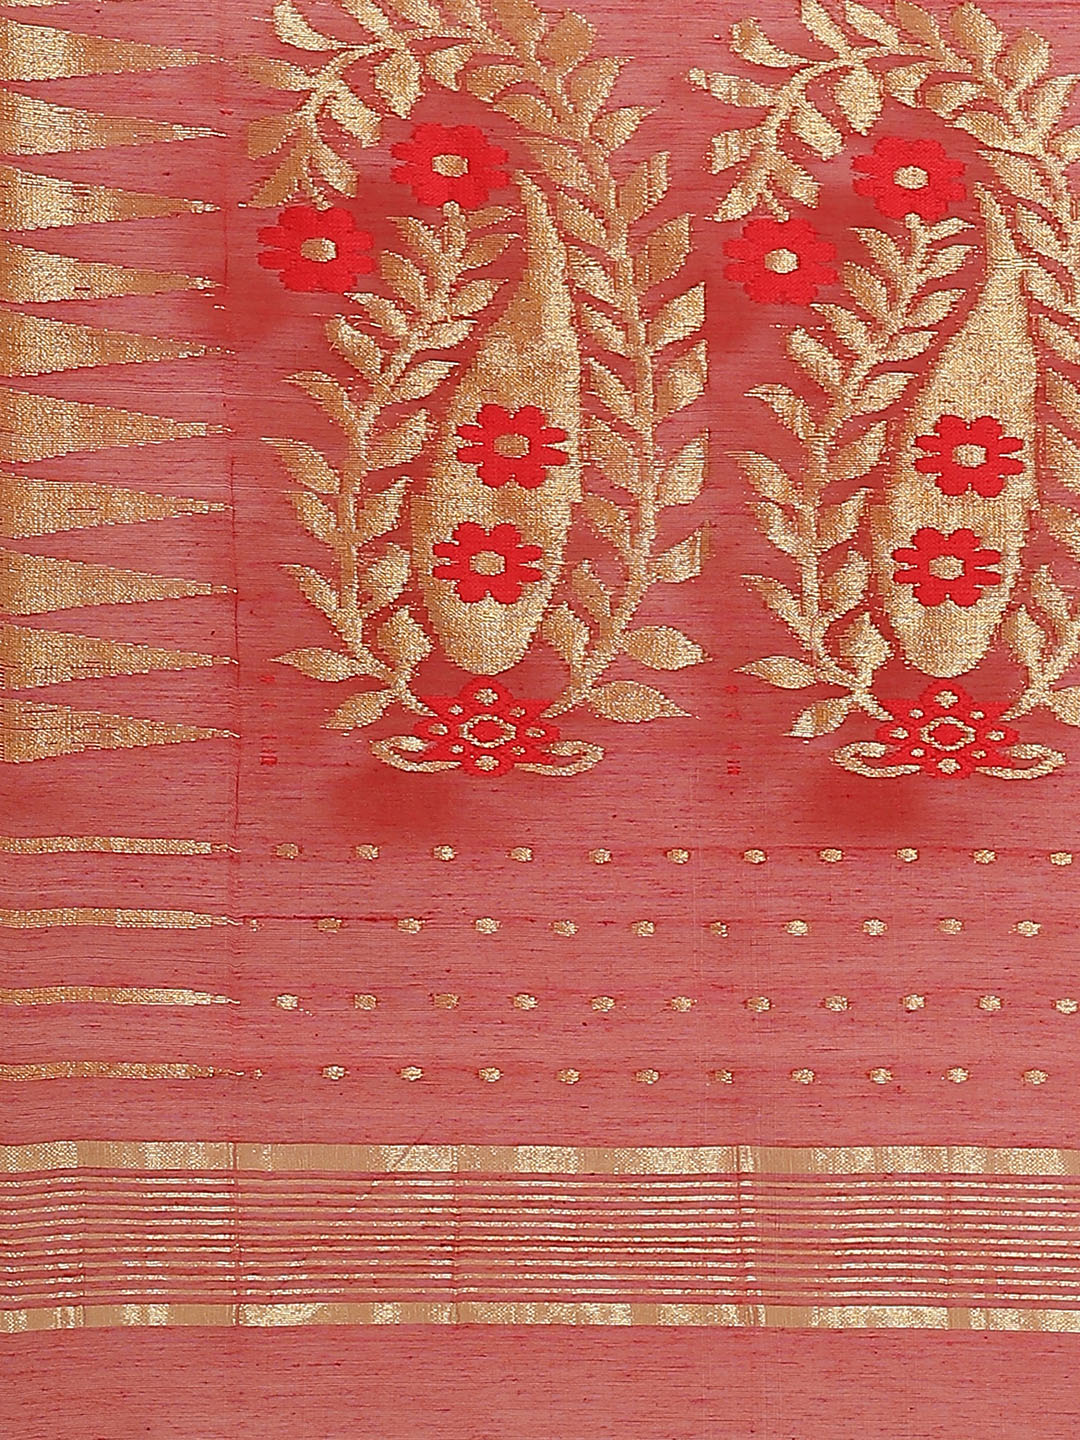 Red and Red, Kalakari India Jamdani Silk Cotton Woven Design Saree without blouse CHBHSA0041-Saree-Kalakari India-CHBHSA0041-Bengal, Geographical Indication, Hand Crafted, Hand Painted, Heritage Prints, Jamdani, Natural Dyes, Red, Sarees, Silk Blended, Sustainable Fabrics, Woven, Yellow-[Linen,Ethnic,wear,Fashionista,Handloom,Handicraft,Indigo,blockprint,block,print,Cotton,Chanderi,Blue, latest,classy,party,bollywood,trendy,summer,style,traditional,formal,elegant,unique,style,hand,block,print, d